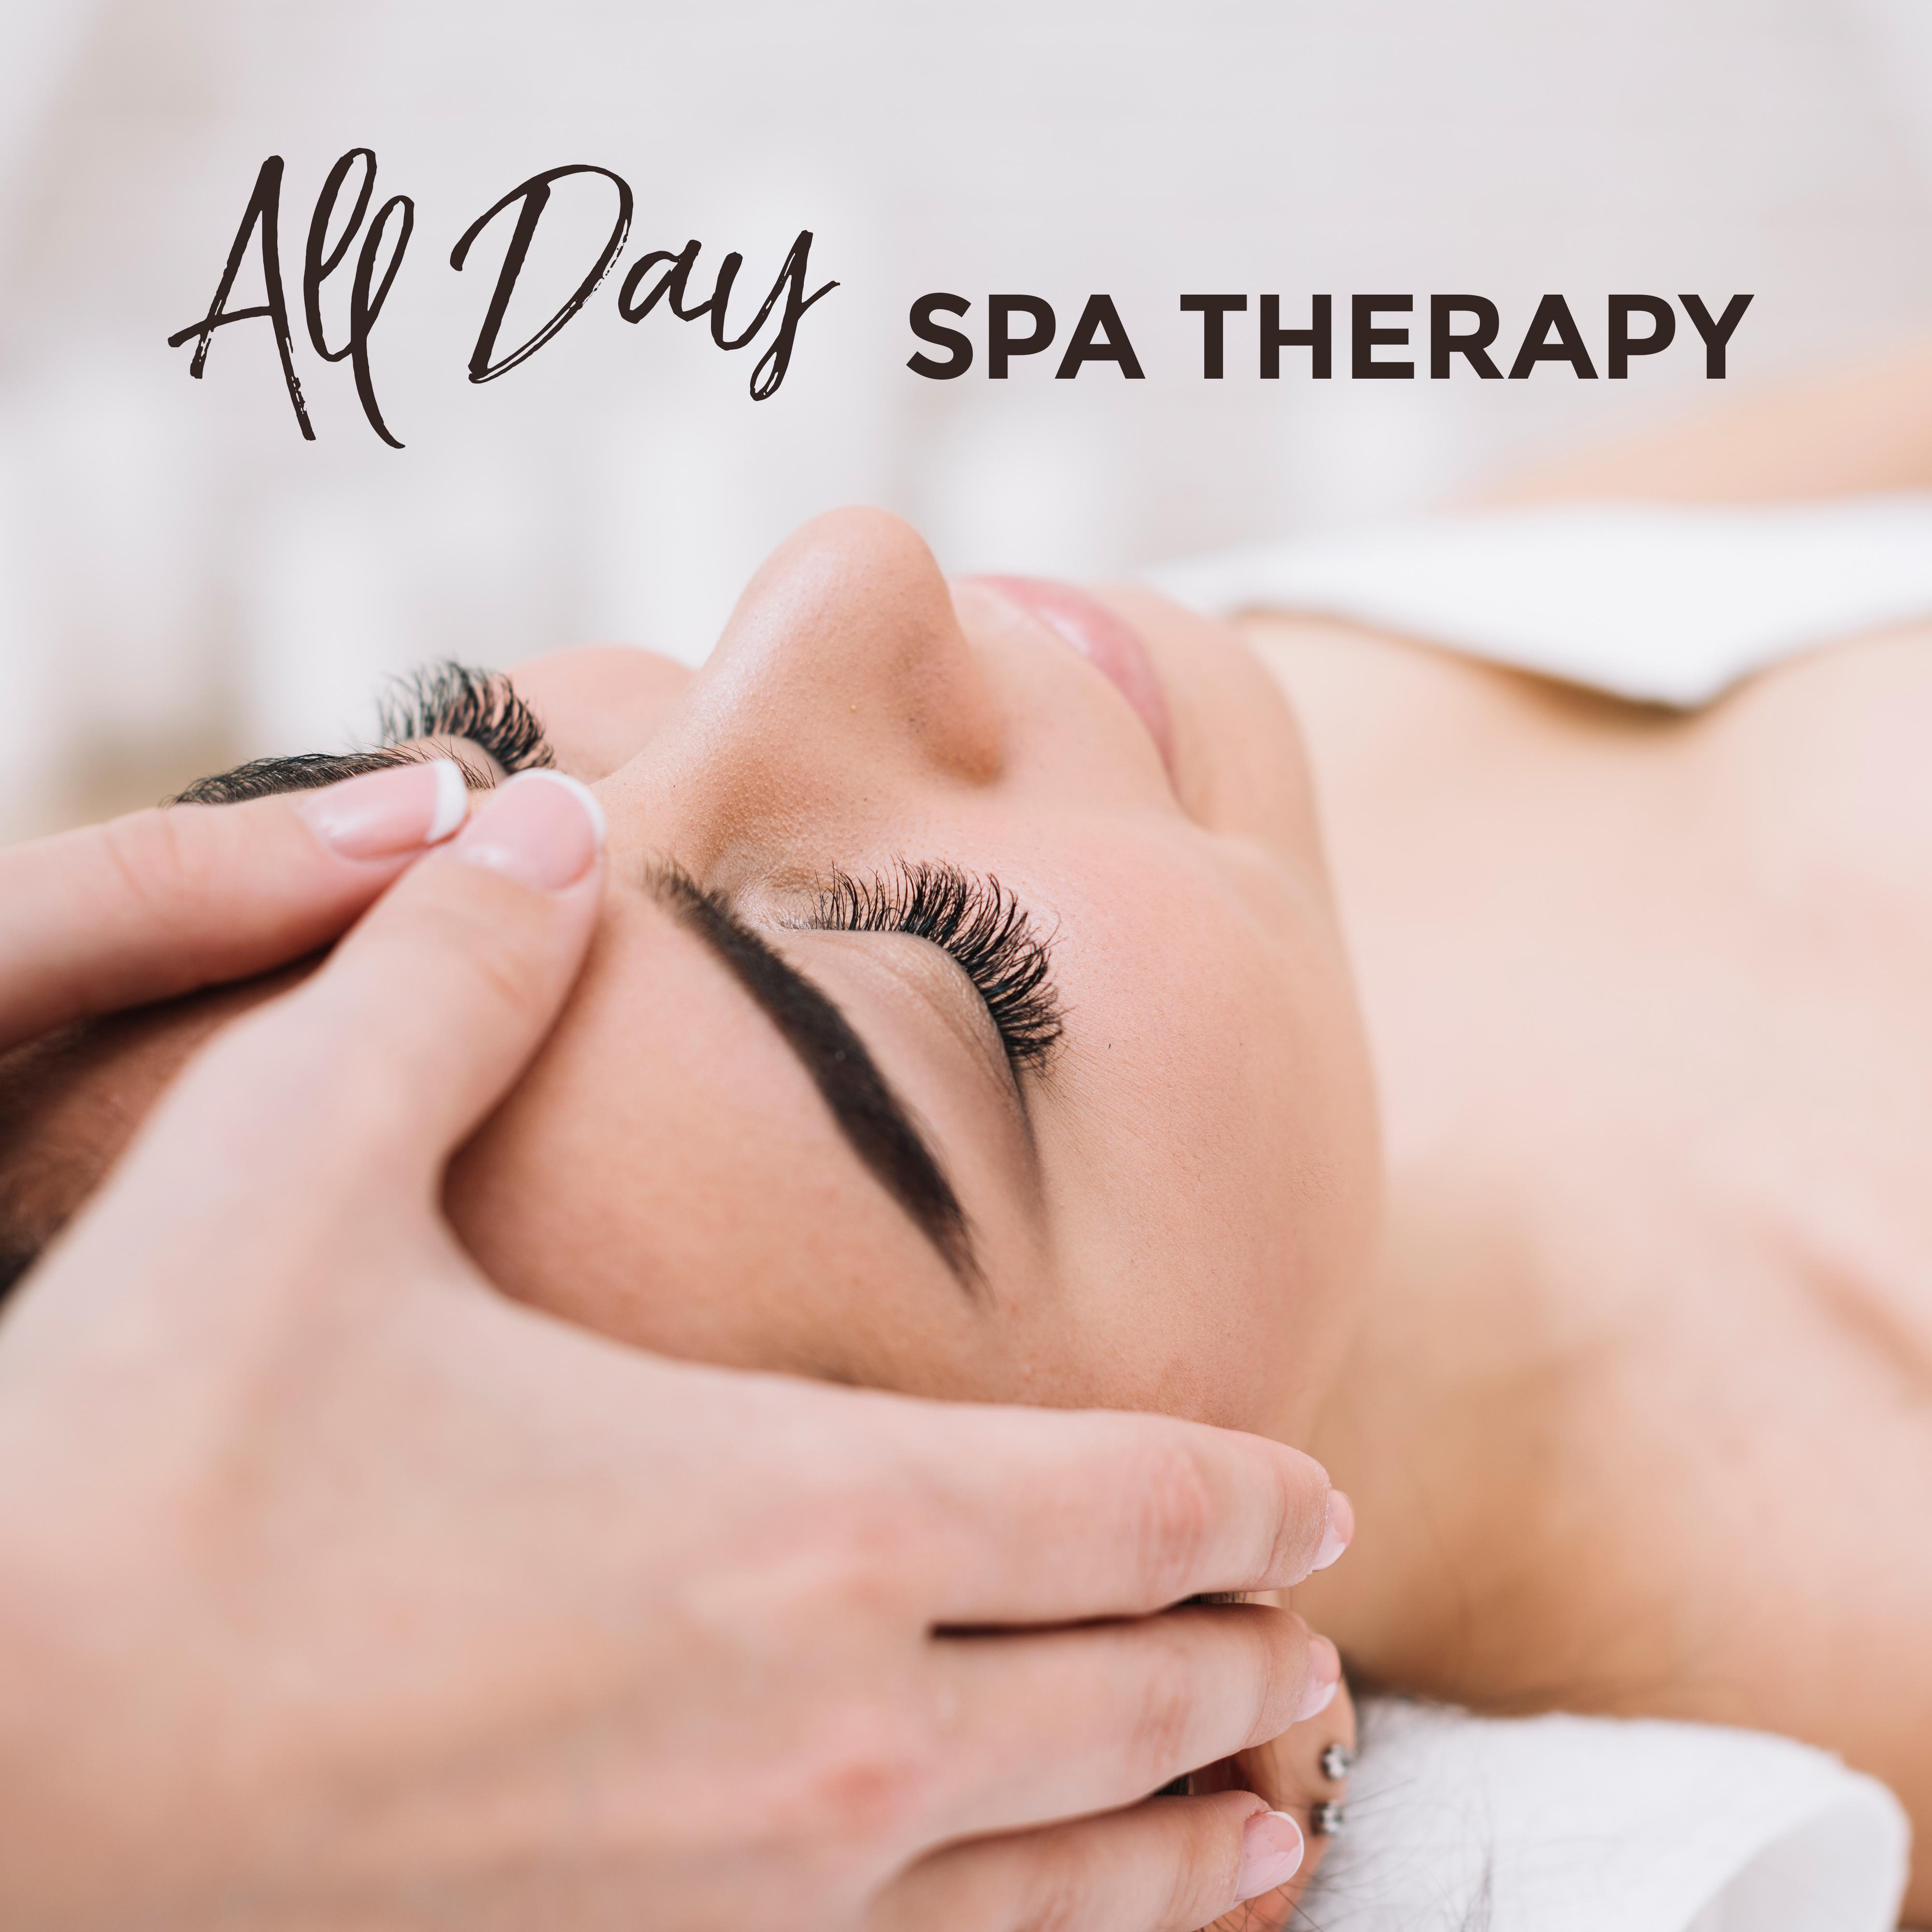 All Day Spa Therapy: 2019 Music Selection for Total Body & Soul Regeneration in Spa Salon, Wellness Relaxation, Massage Session